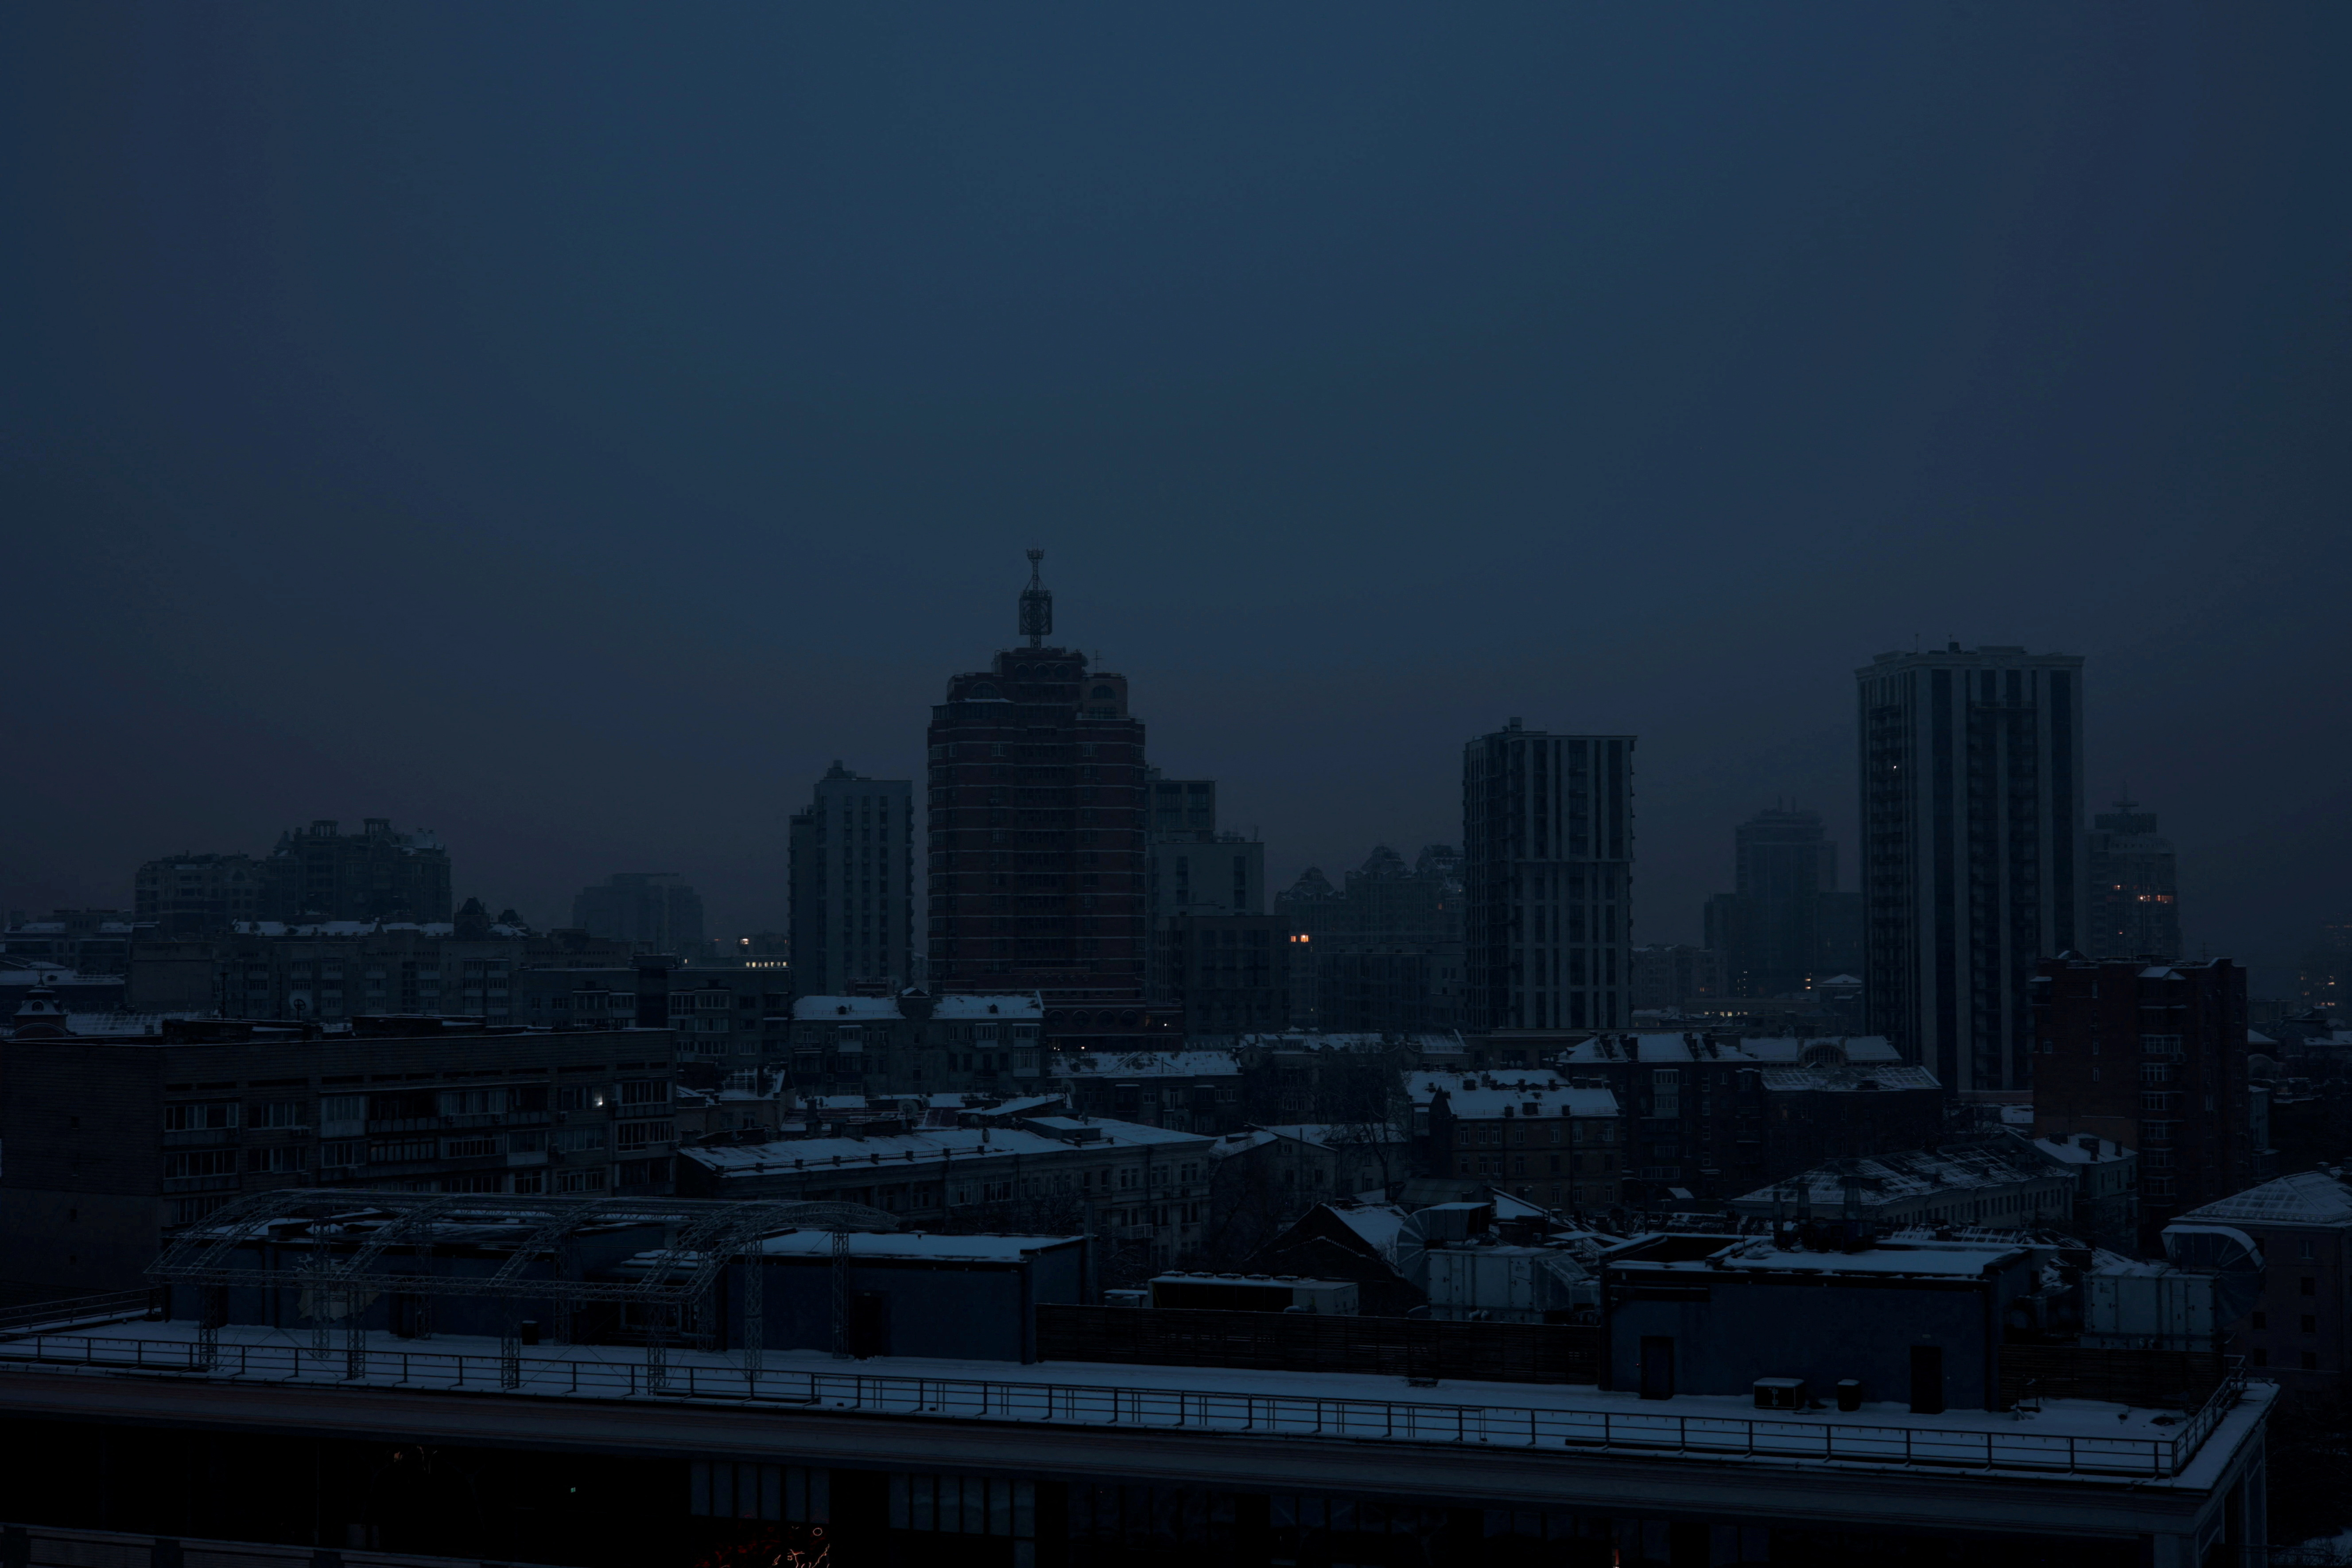 A view shows the city without electricity after critical civil infrastructure was hit by Russian missile attacks in Kyiv